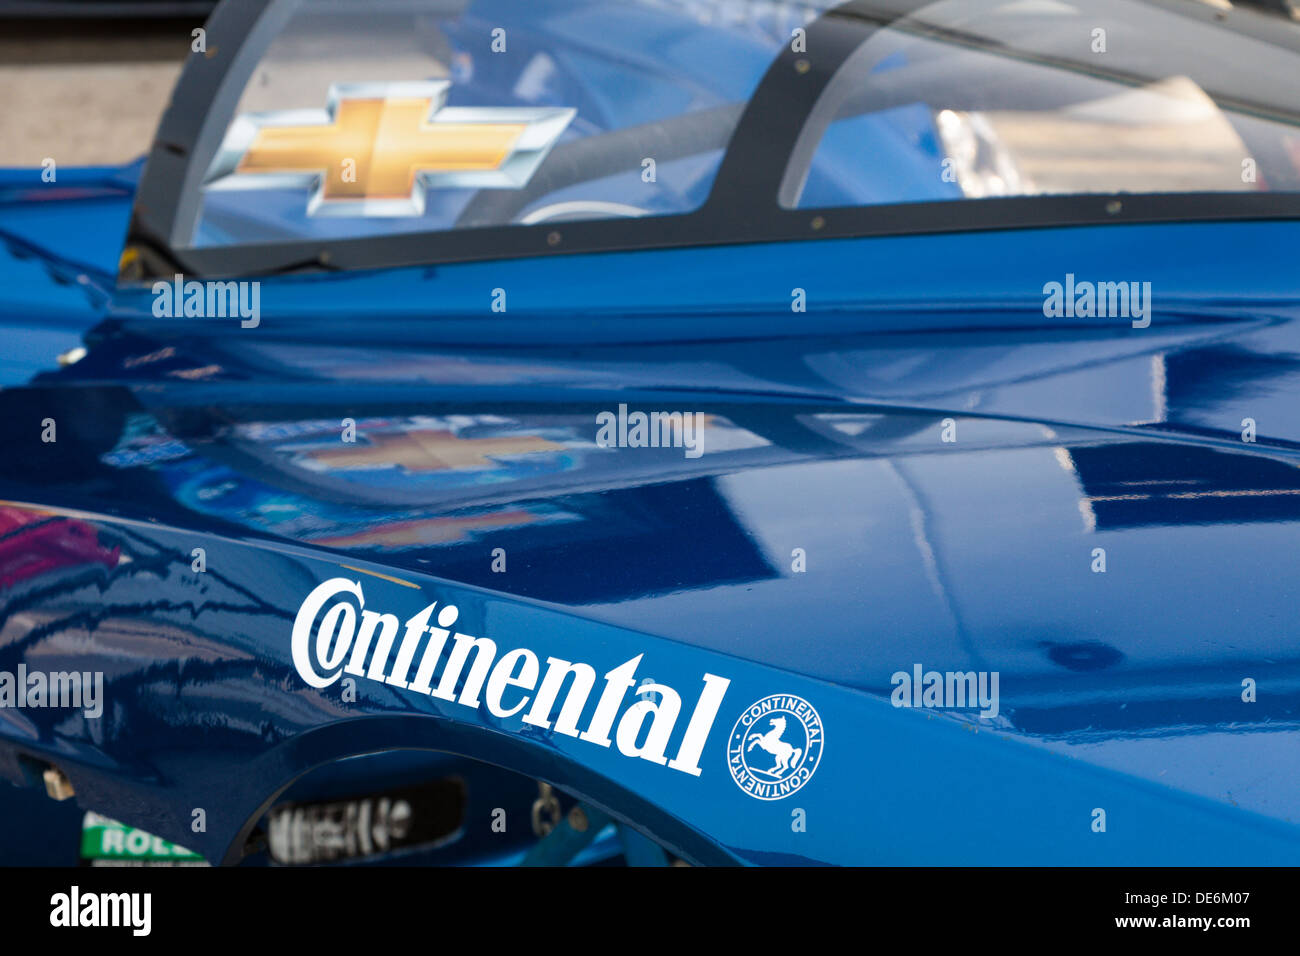 Continental Tire and Chevy logos on race car hood at Daytona International Speedway during the 2012 Rolex 24 at Daytona, Florida Stock Photo